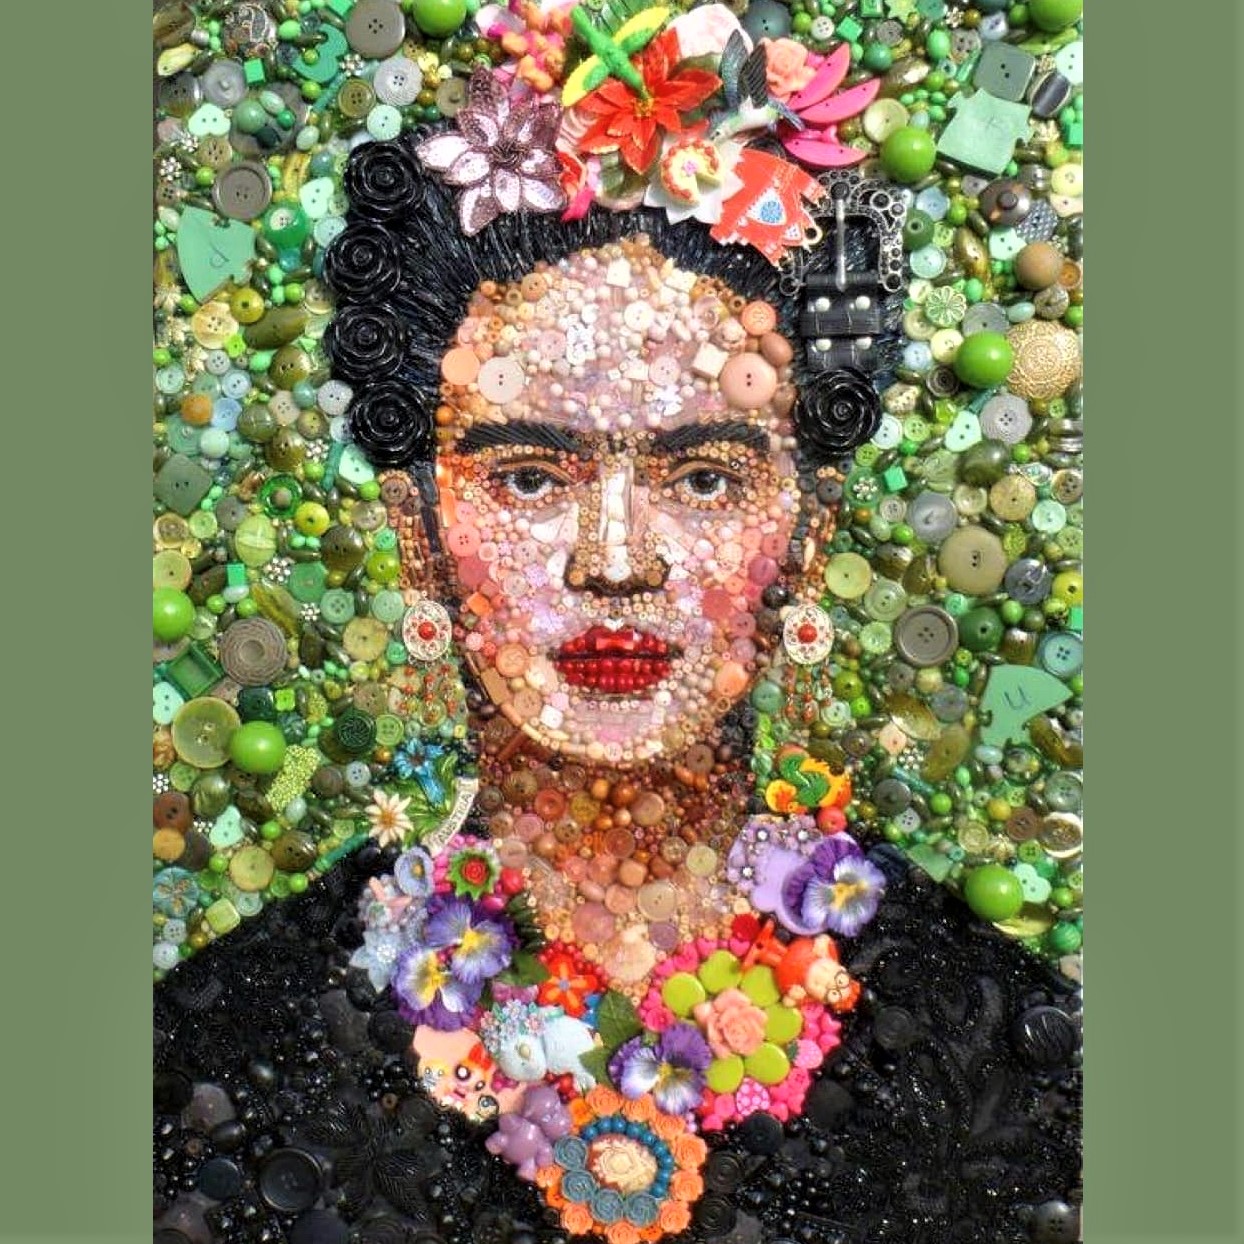 'Frida,' by UK artist Jane Perkins who creates collage/mosaic artwork from found and upcycled material